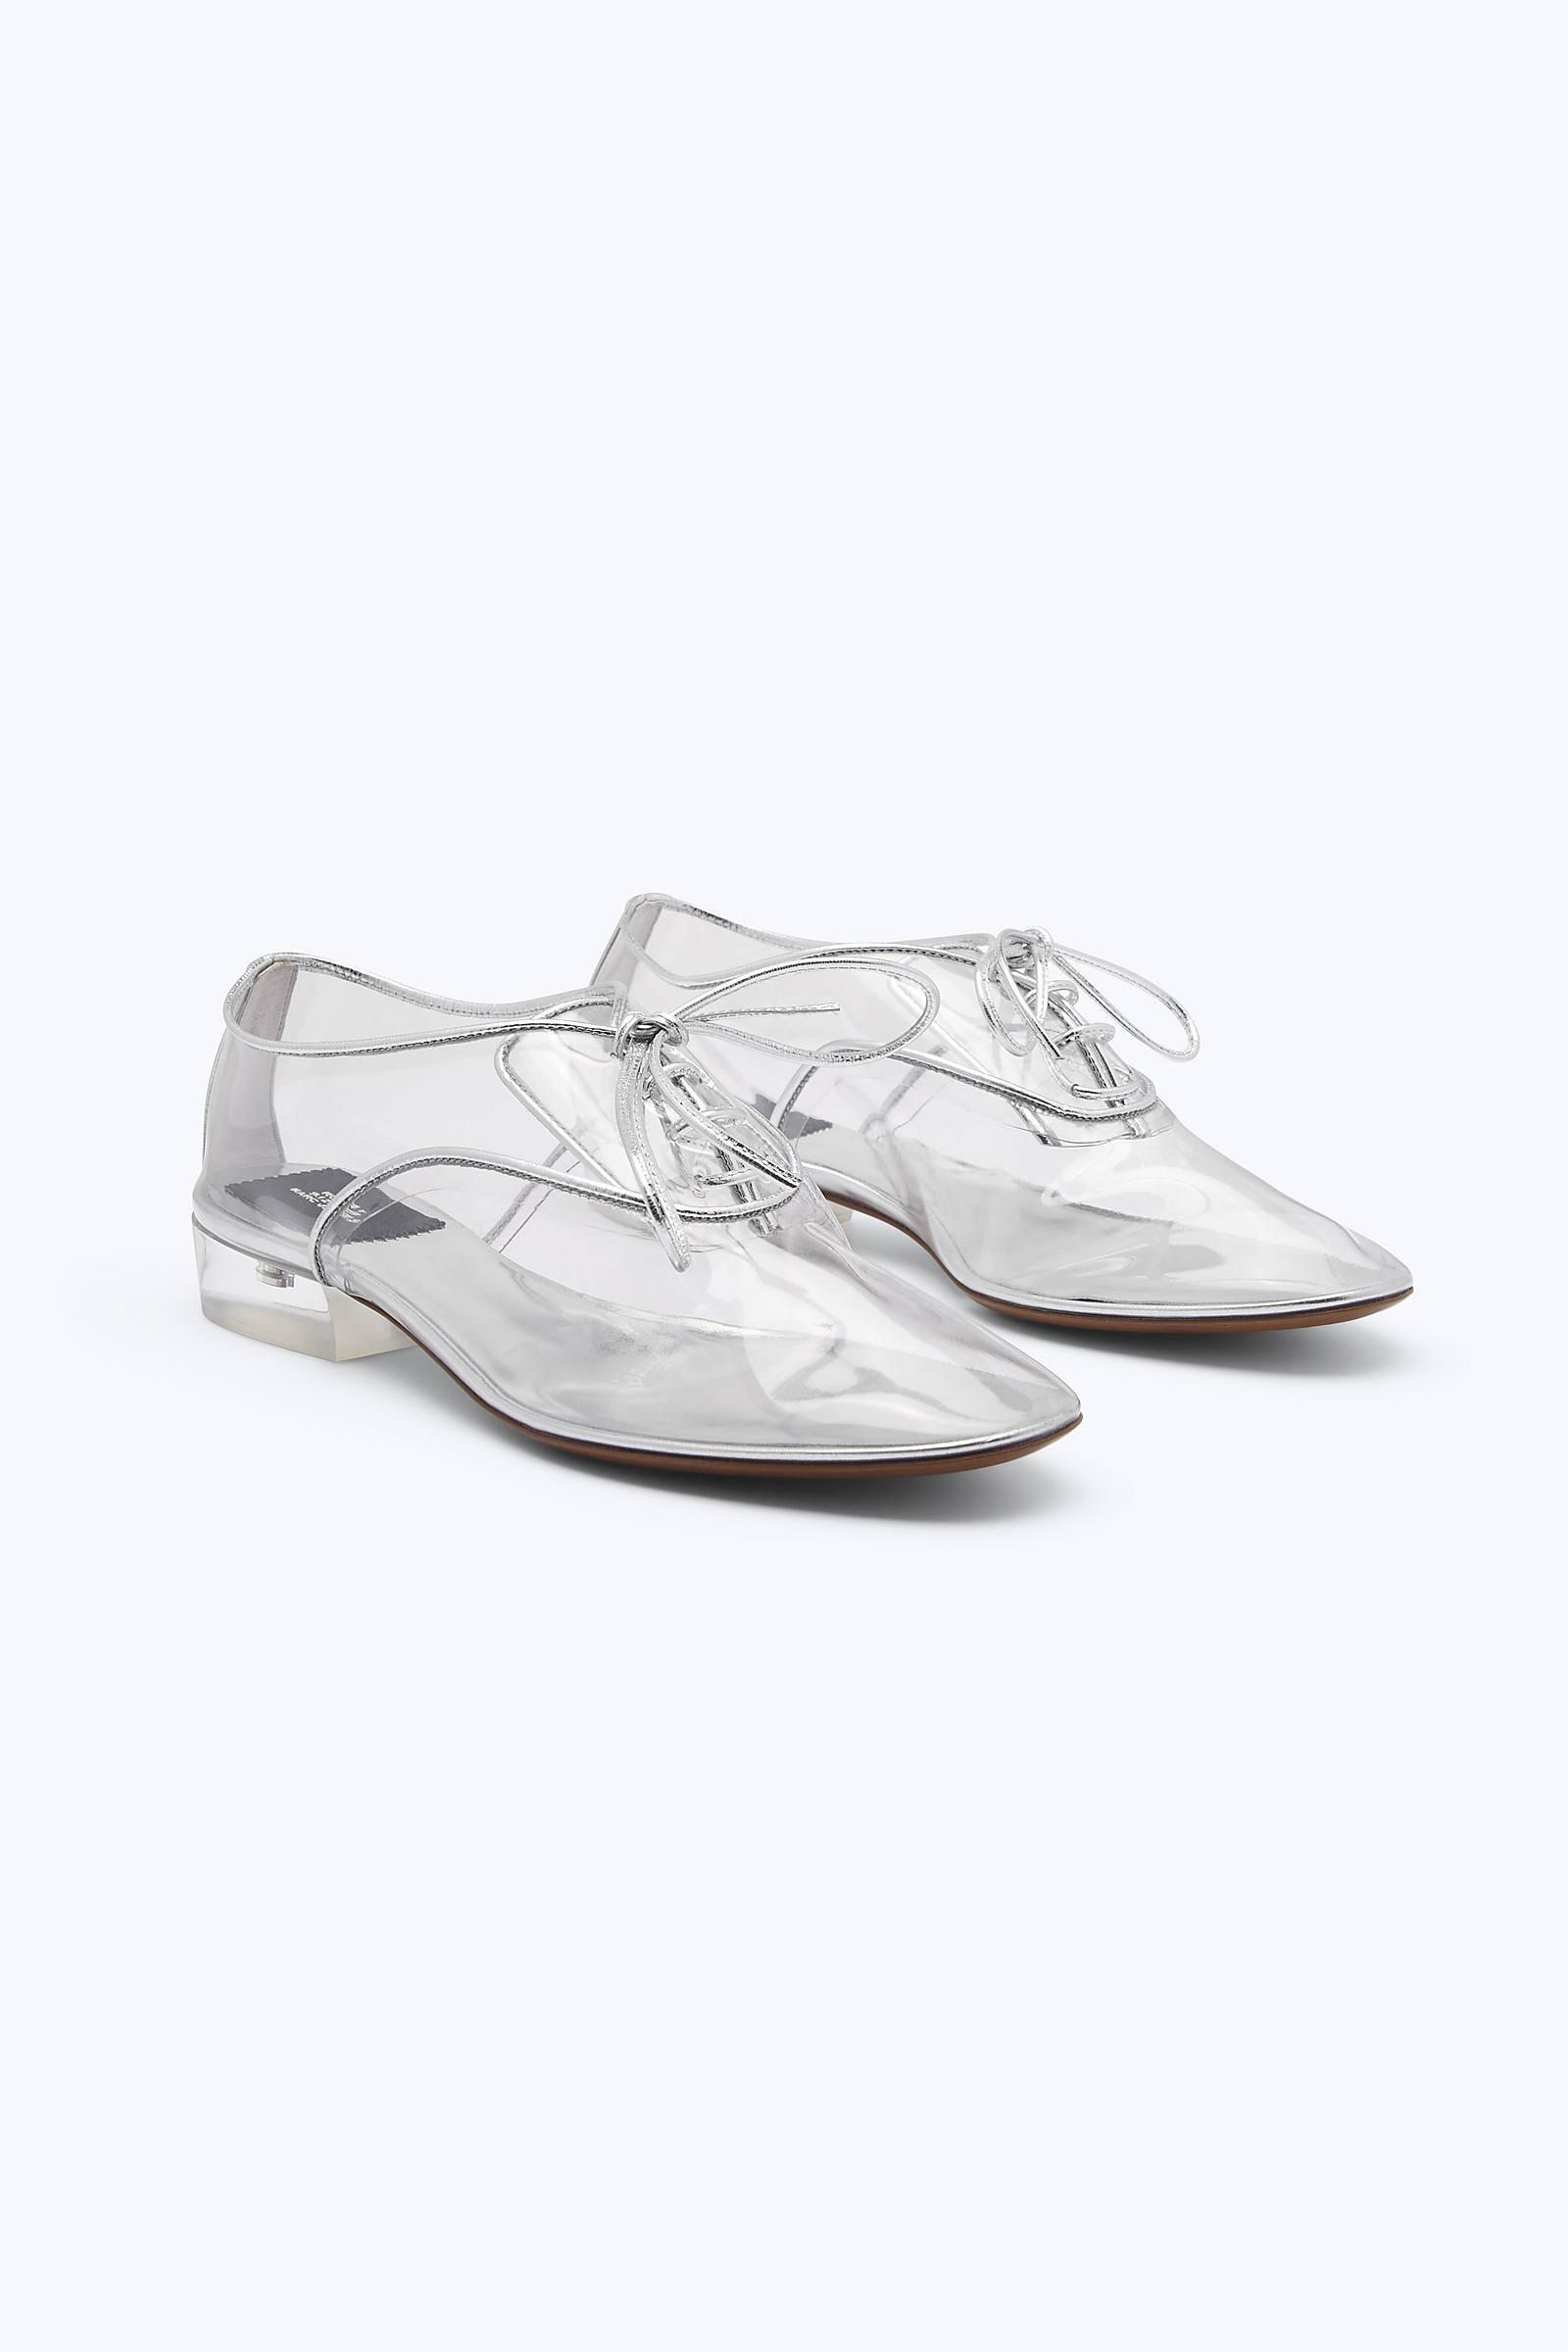 Marc Jacobs Leather Clear-heel Oxford 